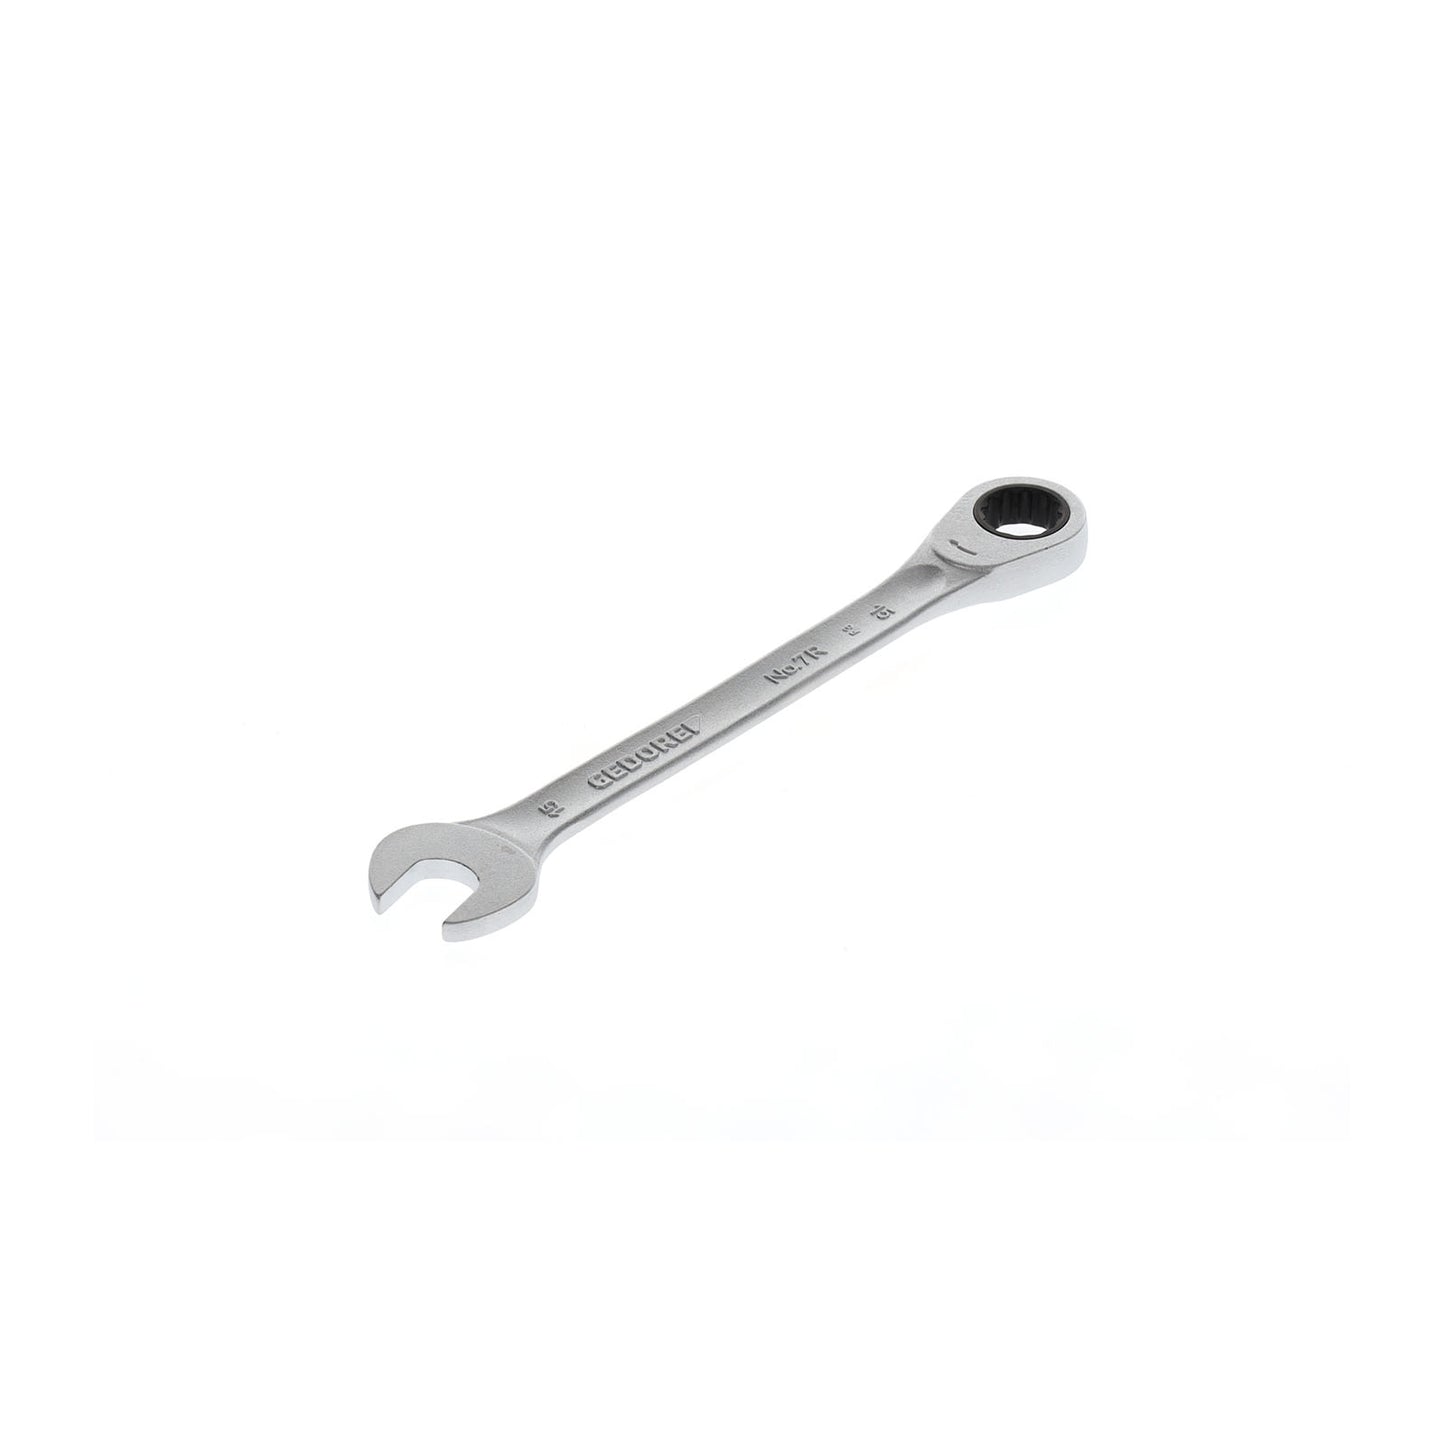 GEDORE 7 R 15 - Ratchet combination wrench, 15mm (2297132)